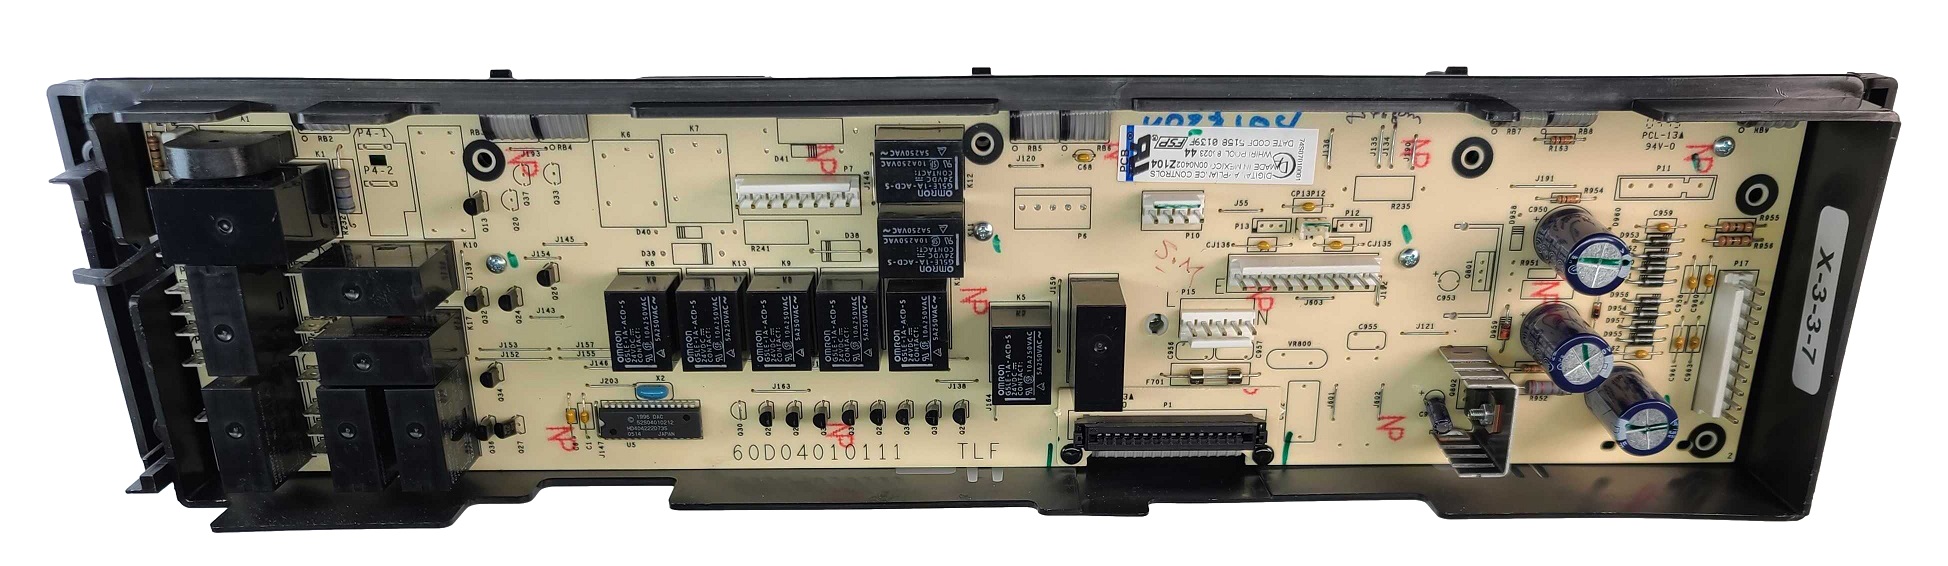 Range Control Board 4448871 Repair Service For Whirlpool Oven 